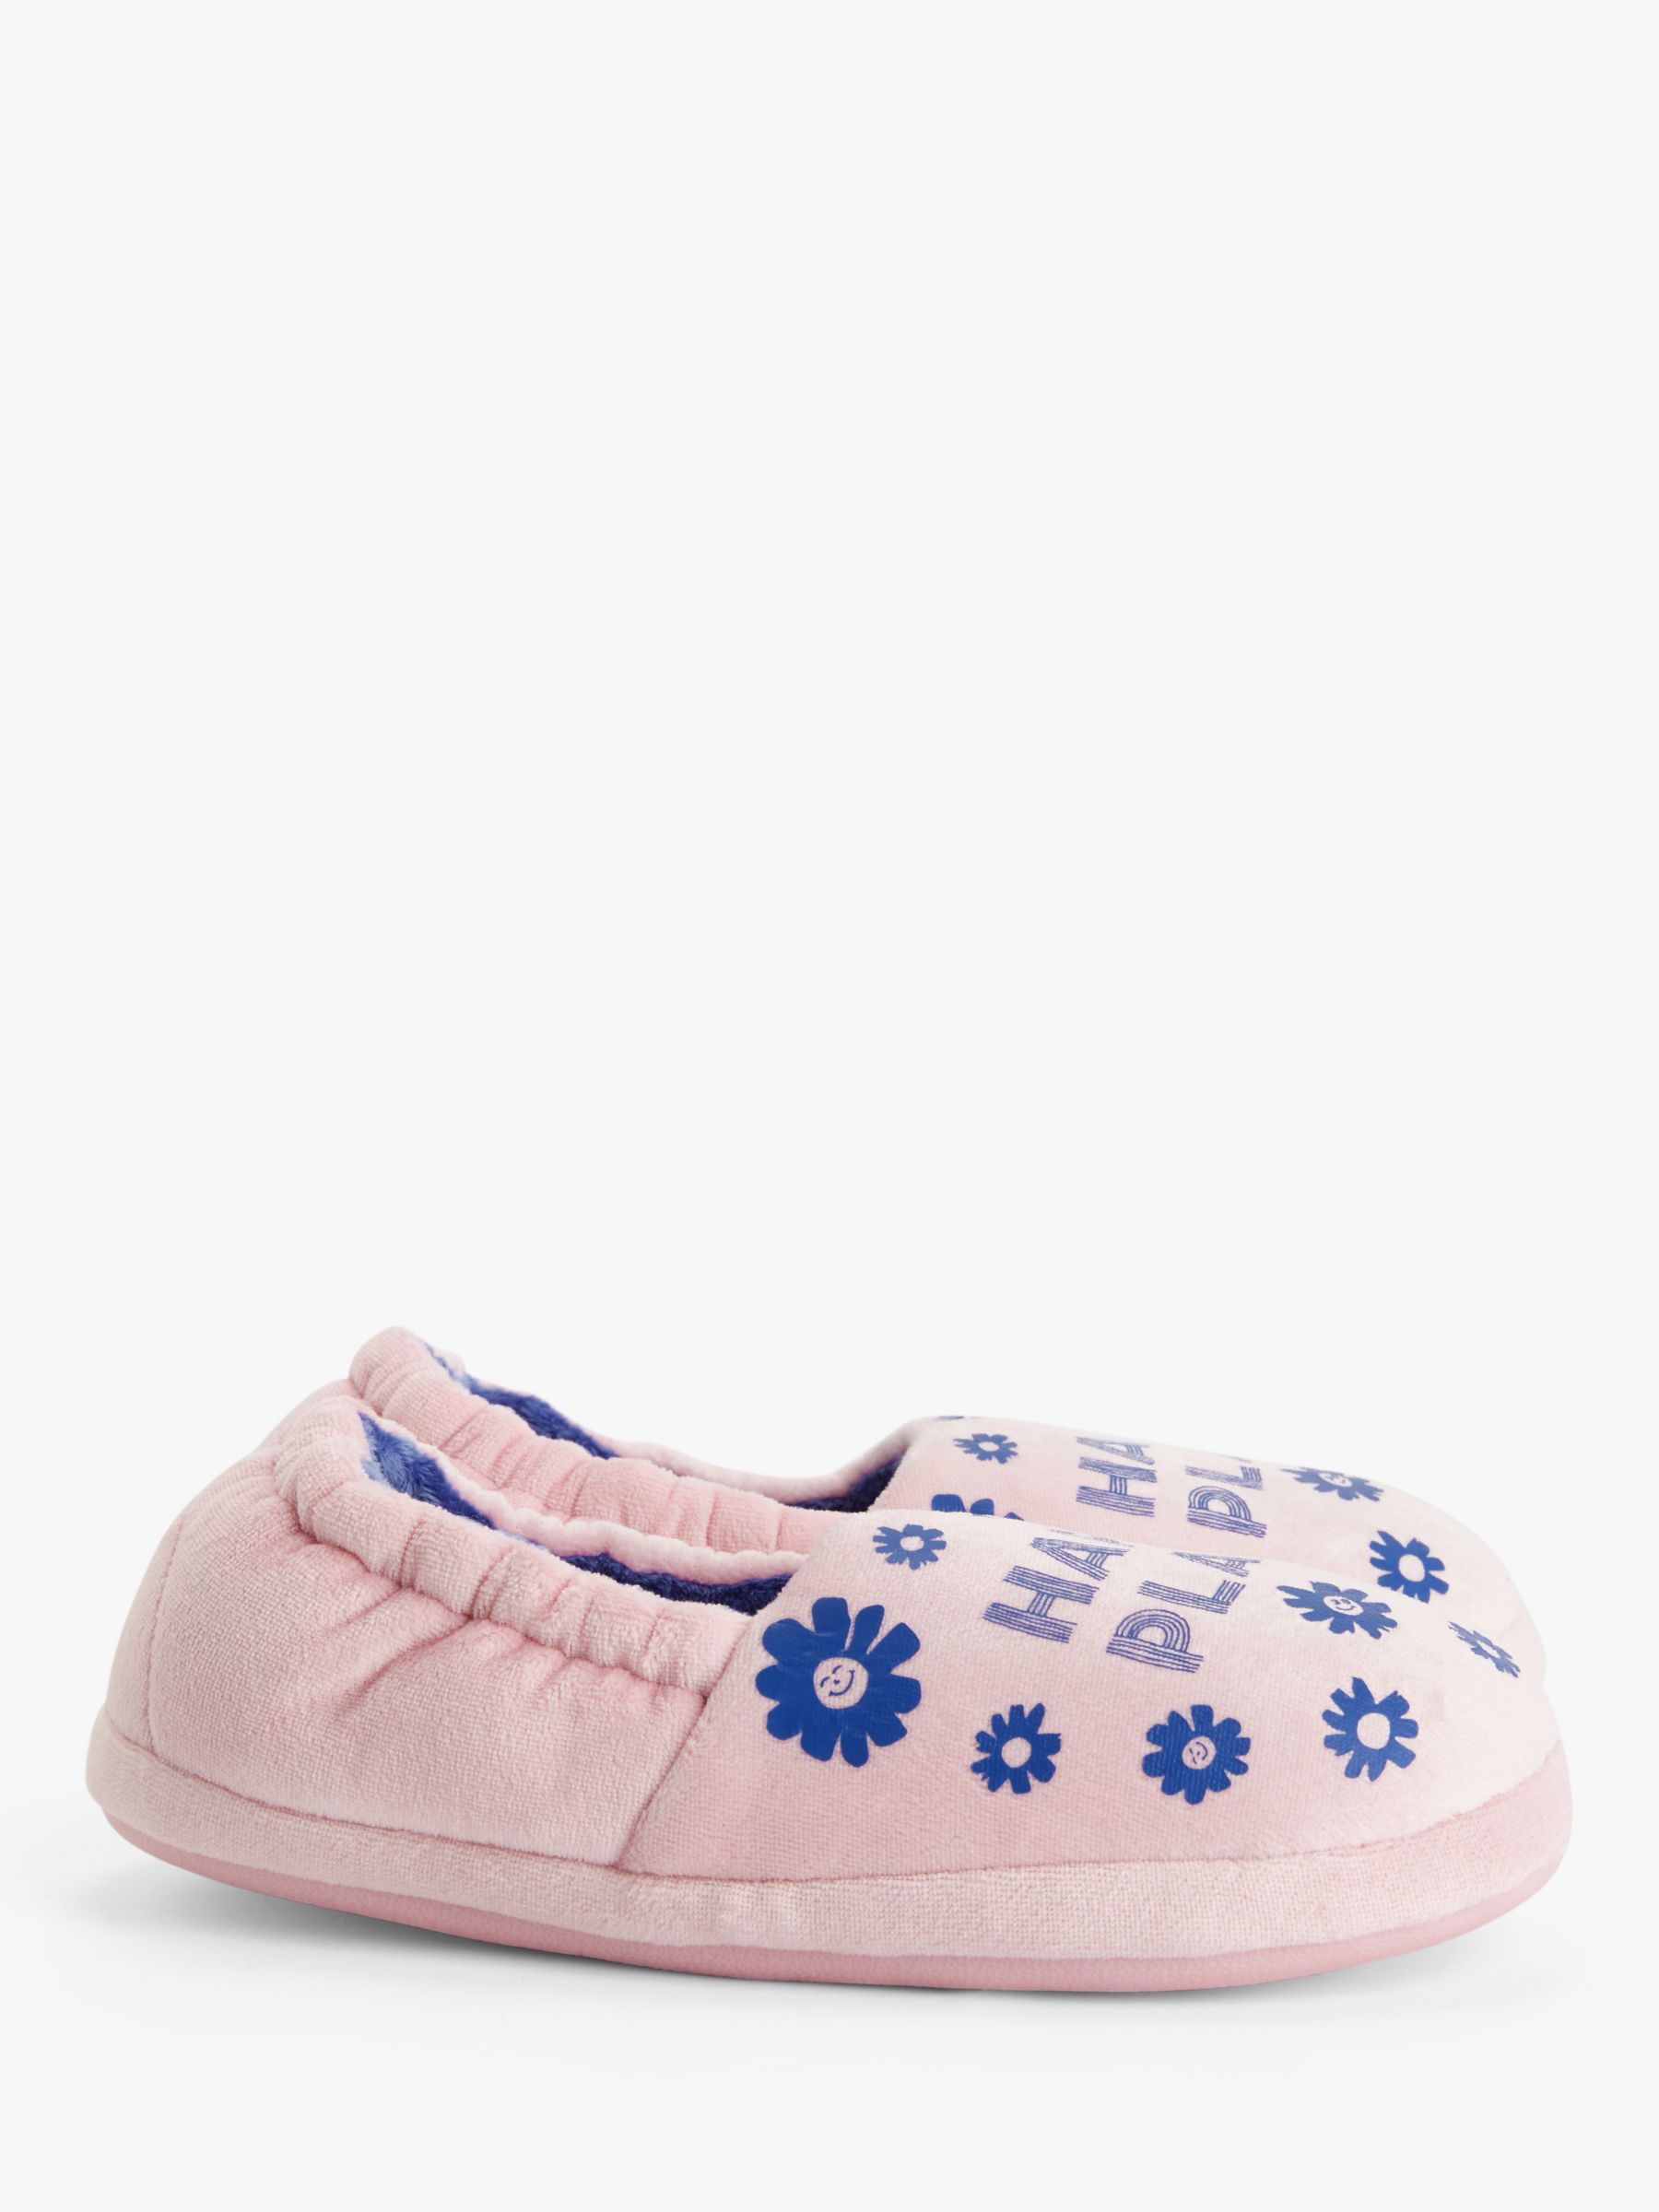 Buy John Lewis ANYDAY Kids' Happy Place Slippers Online at johnlewis.com